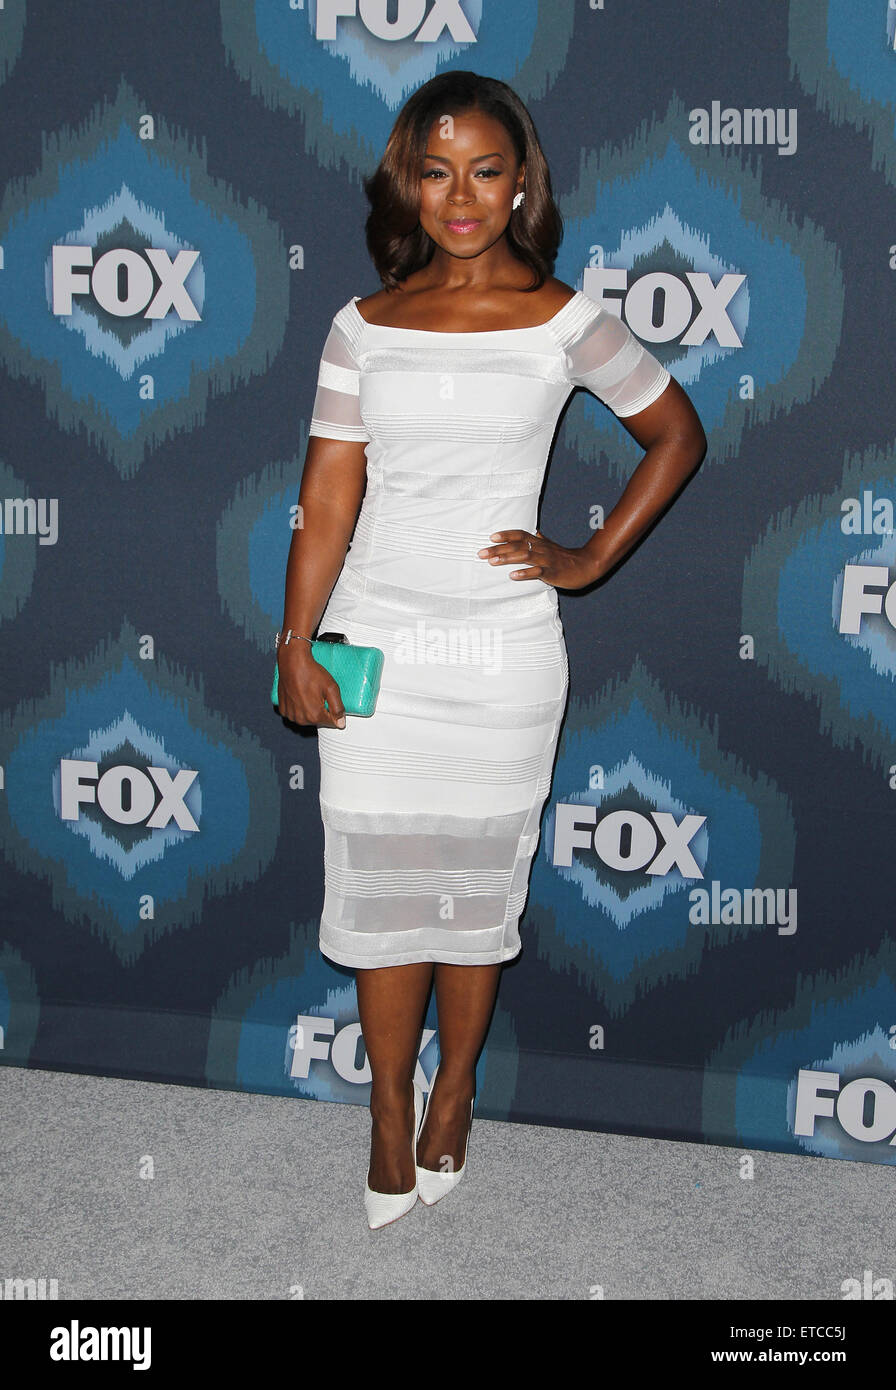 2015 FOX Winter Television Critics Association All-Star Party at the Langham Huntington Hotel - Arrivals  Featuring: Erica Tazel Where: Los Angeles, California, United States When: 17 Jan 2015 Credit: FayesVision/WENN.com Stock Photo